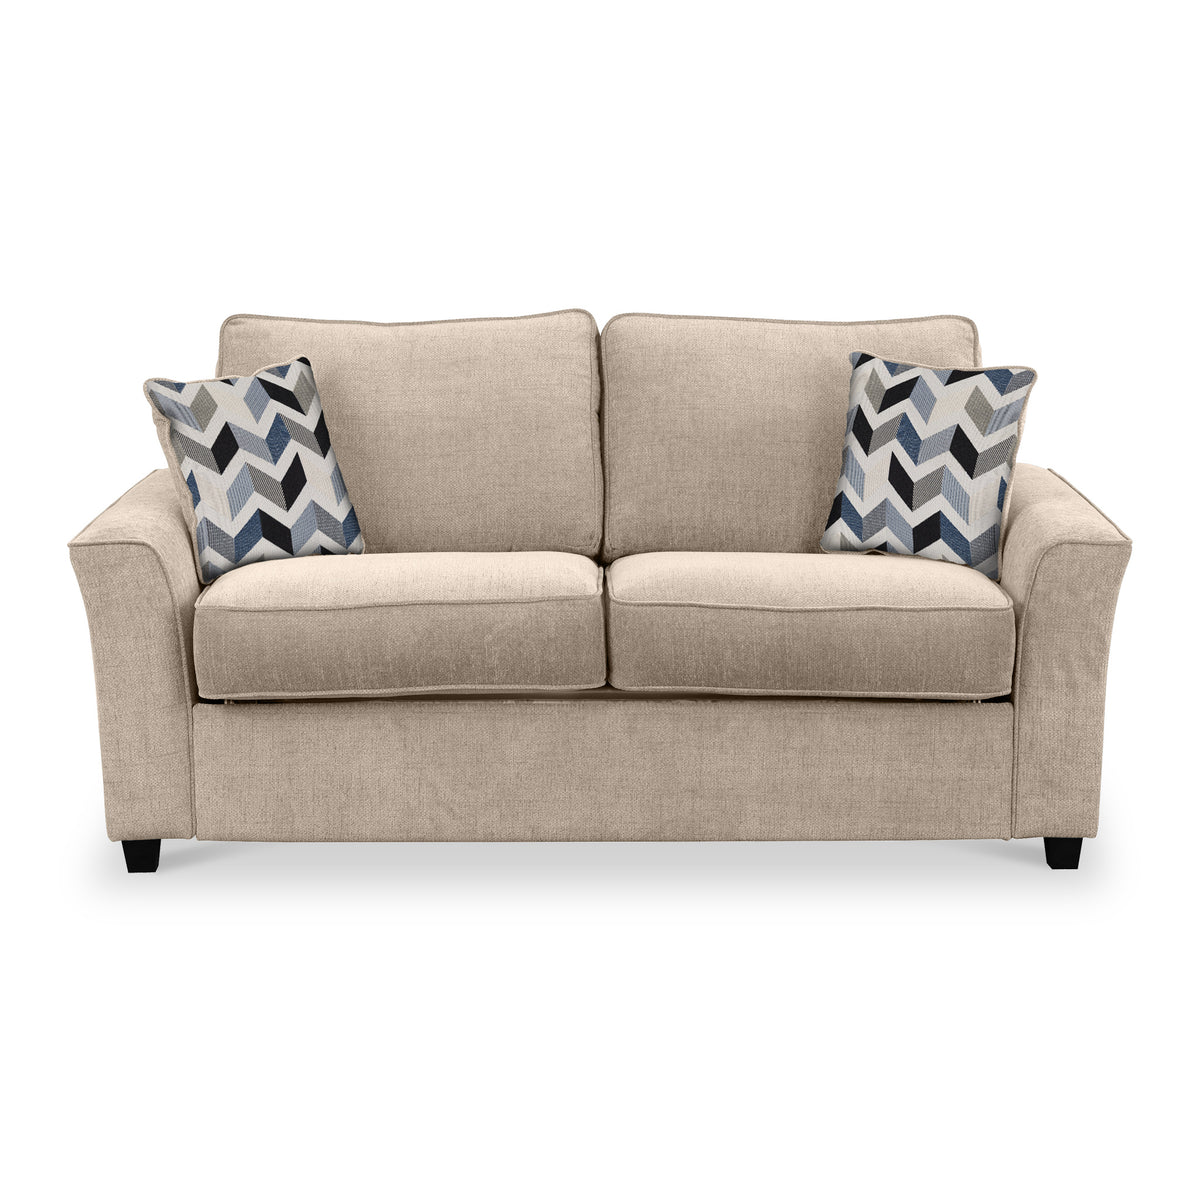 Abbott 2 Seater Sofabed in Oatmeal with Morelisa Denim Cushions by Roseland Furniture